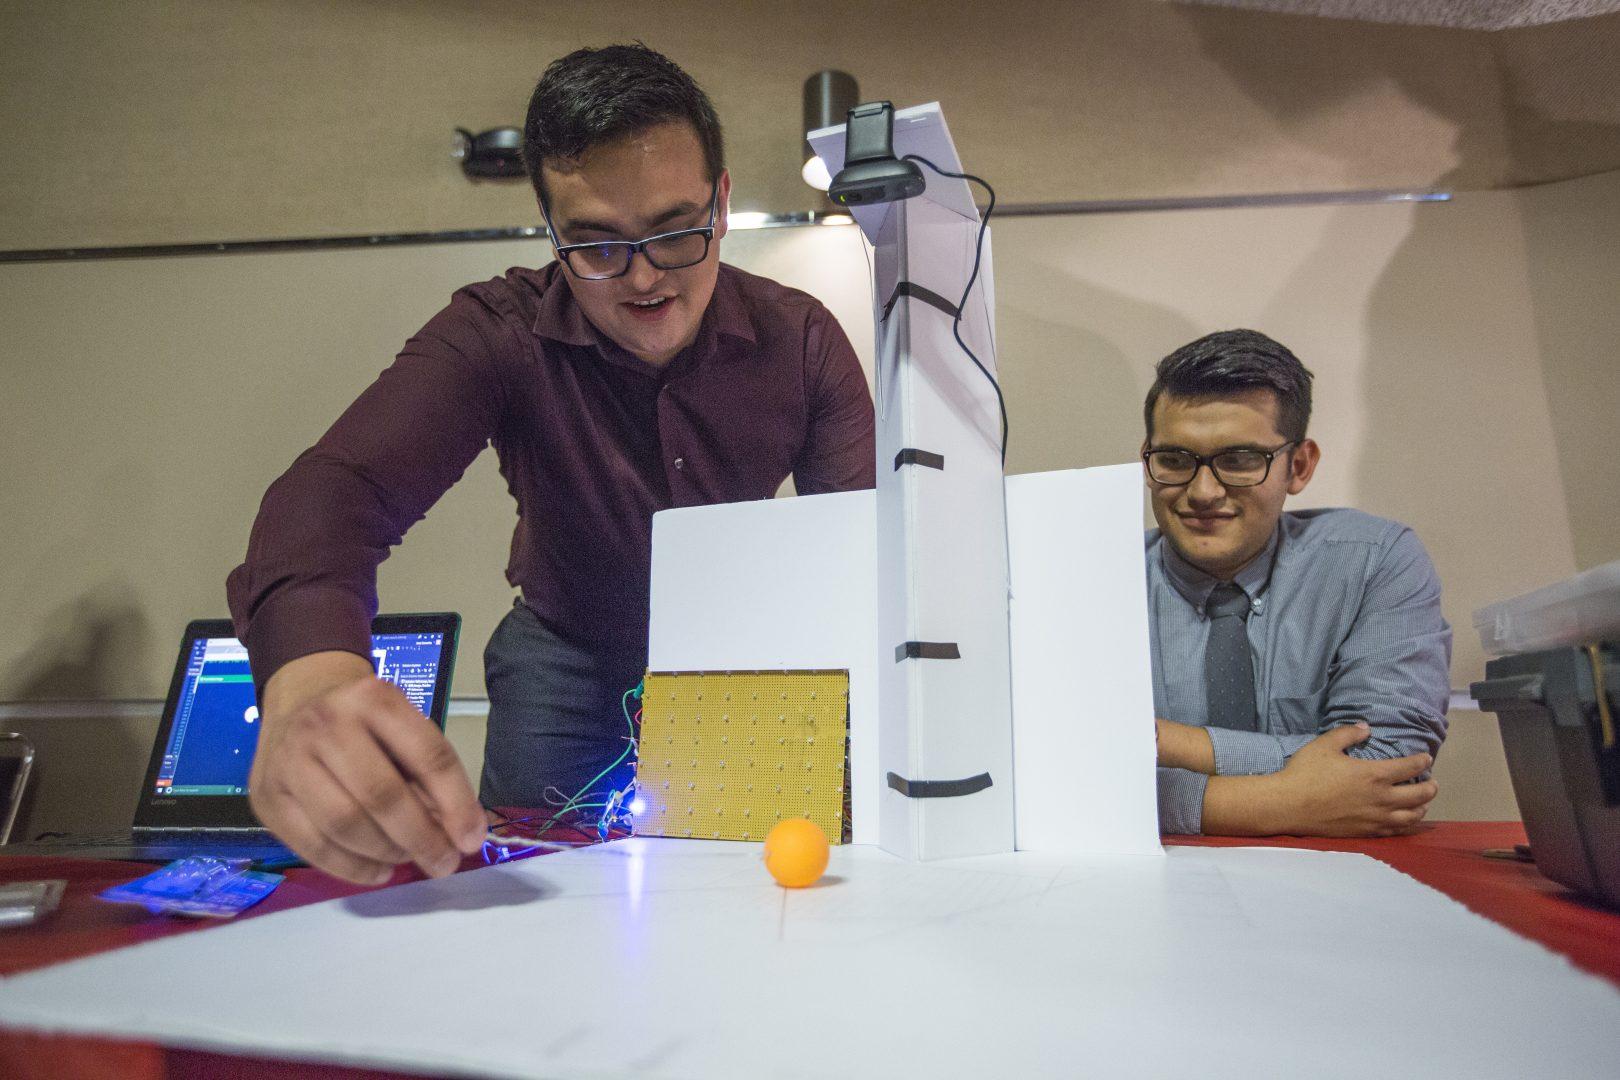 Fresno State students Jose Camacho (left) and Mauricio Cruz (right) gives a demonstration of the project, Object Tracker and Path Projection during the 10th annual Projects Day in the Satellite Student Union on May 9, 2017. The objective of the project is to track an object and indicate its path with the use of a camera, visual studio and OpenCV. For this project, students tracked a ping-pong ball and used LED lights to illuminate its path. (Khone Saysamongdy/The Collegian)